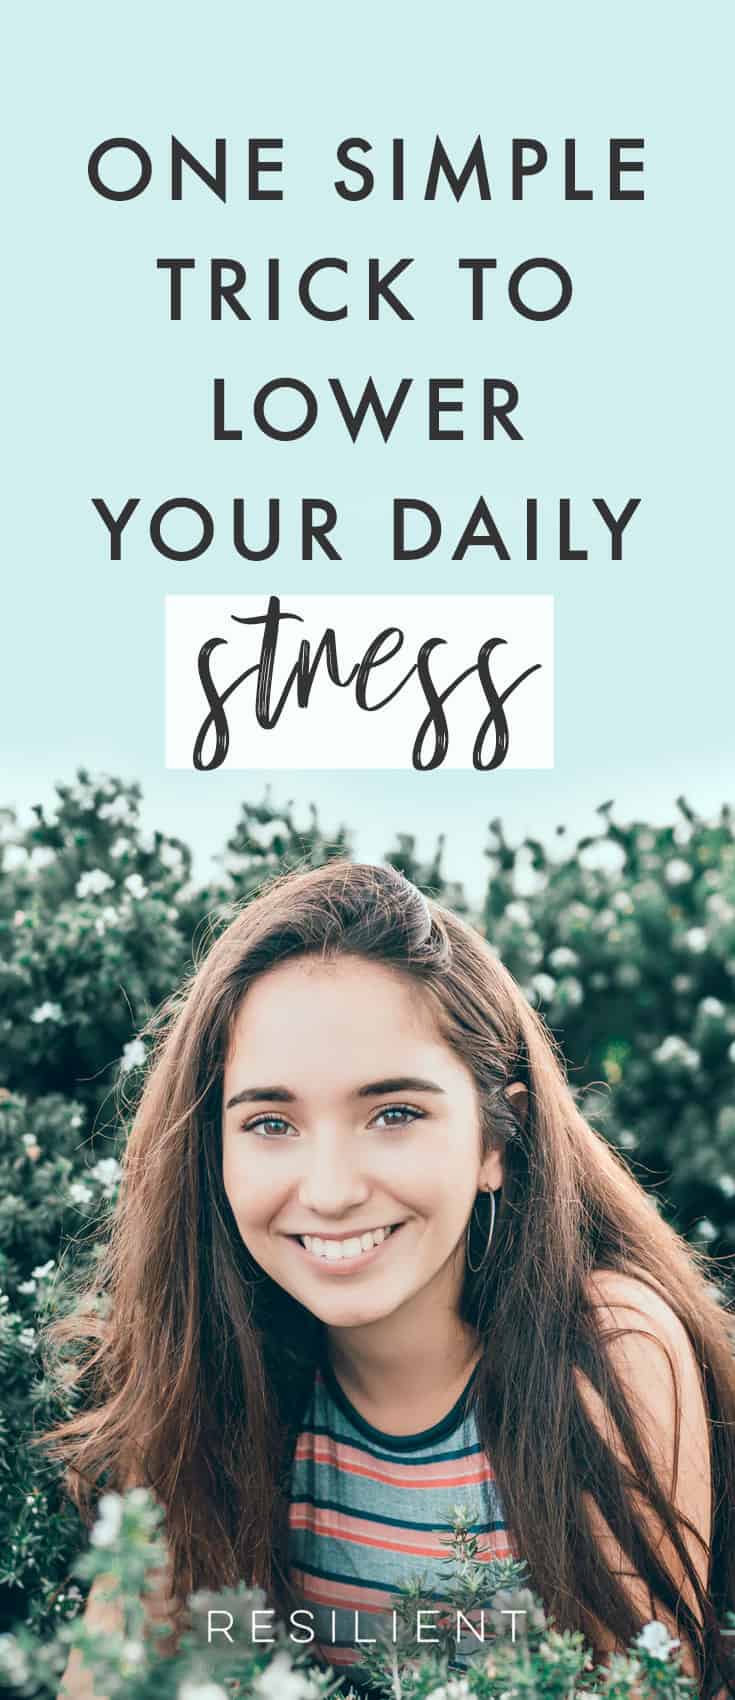 Reducing the amount of stress in your life is helpful in creating a calmer, more peaceful life for yourself. Here is one simple trick to lower your stress.